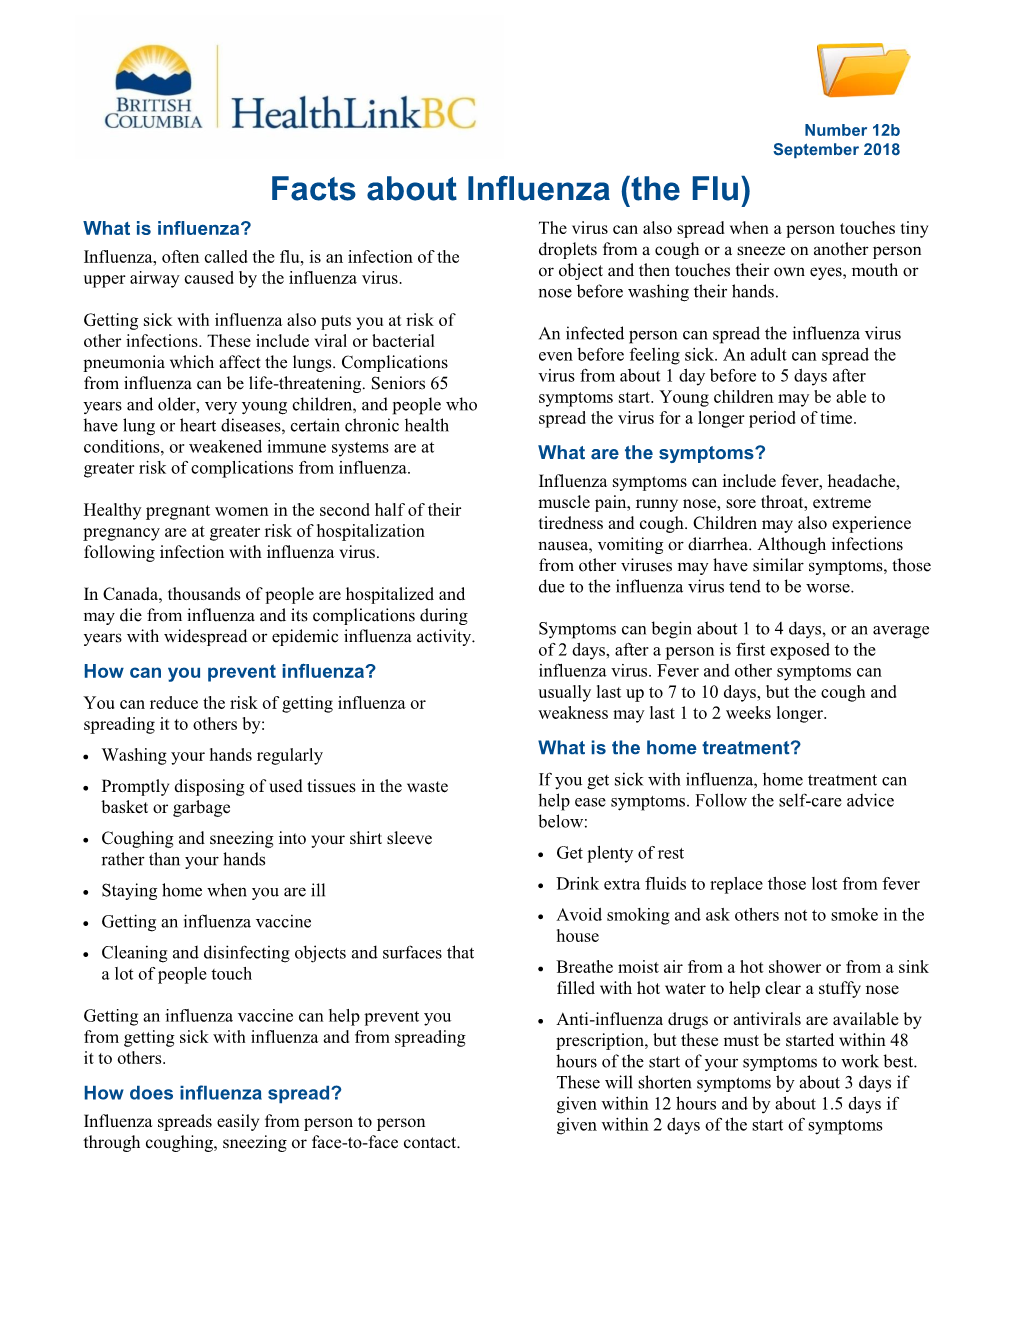 Facts About Influenza (The Flu)